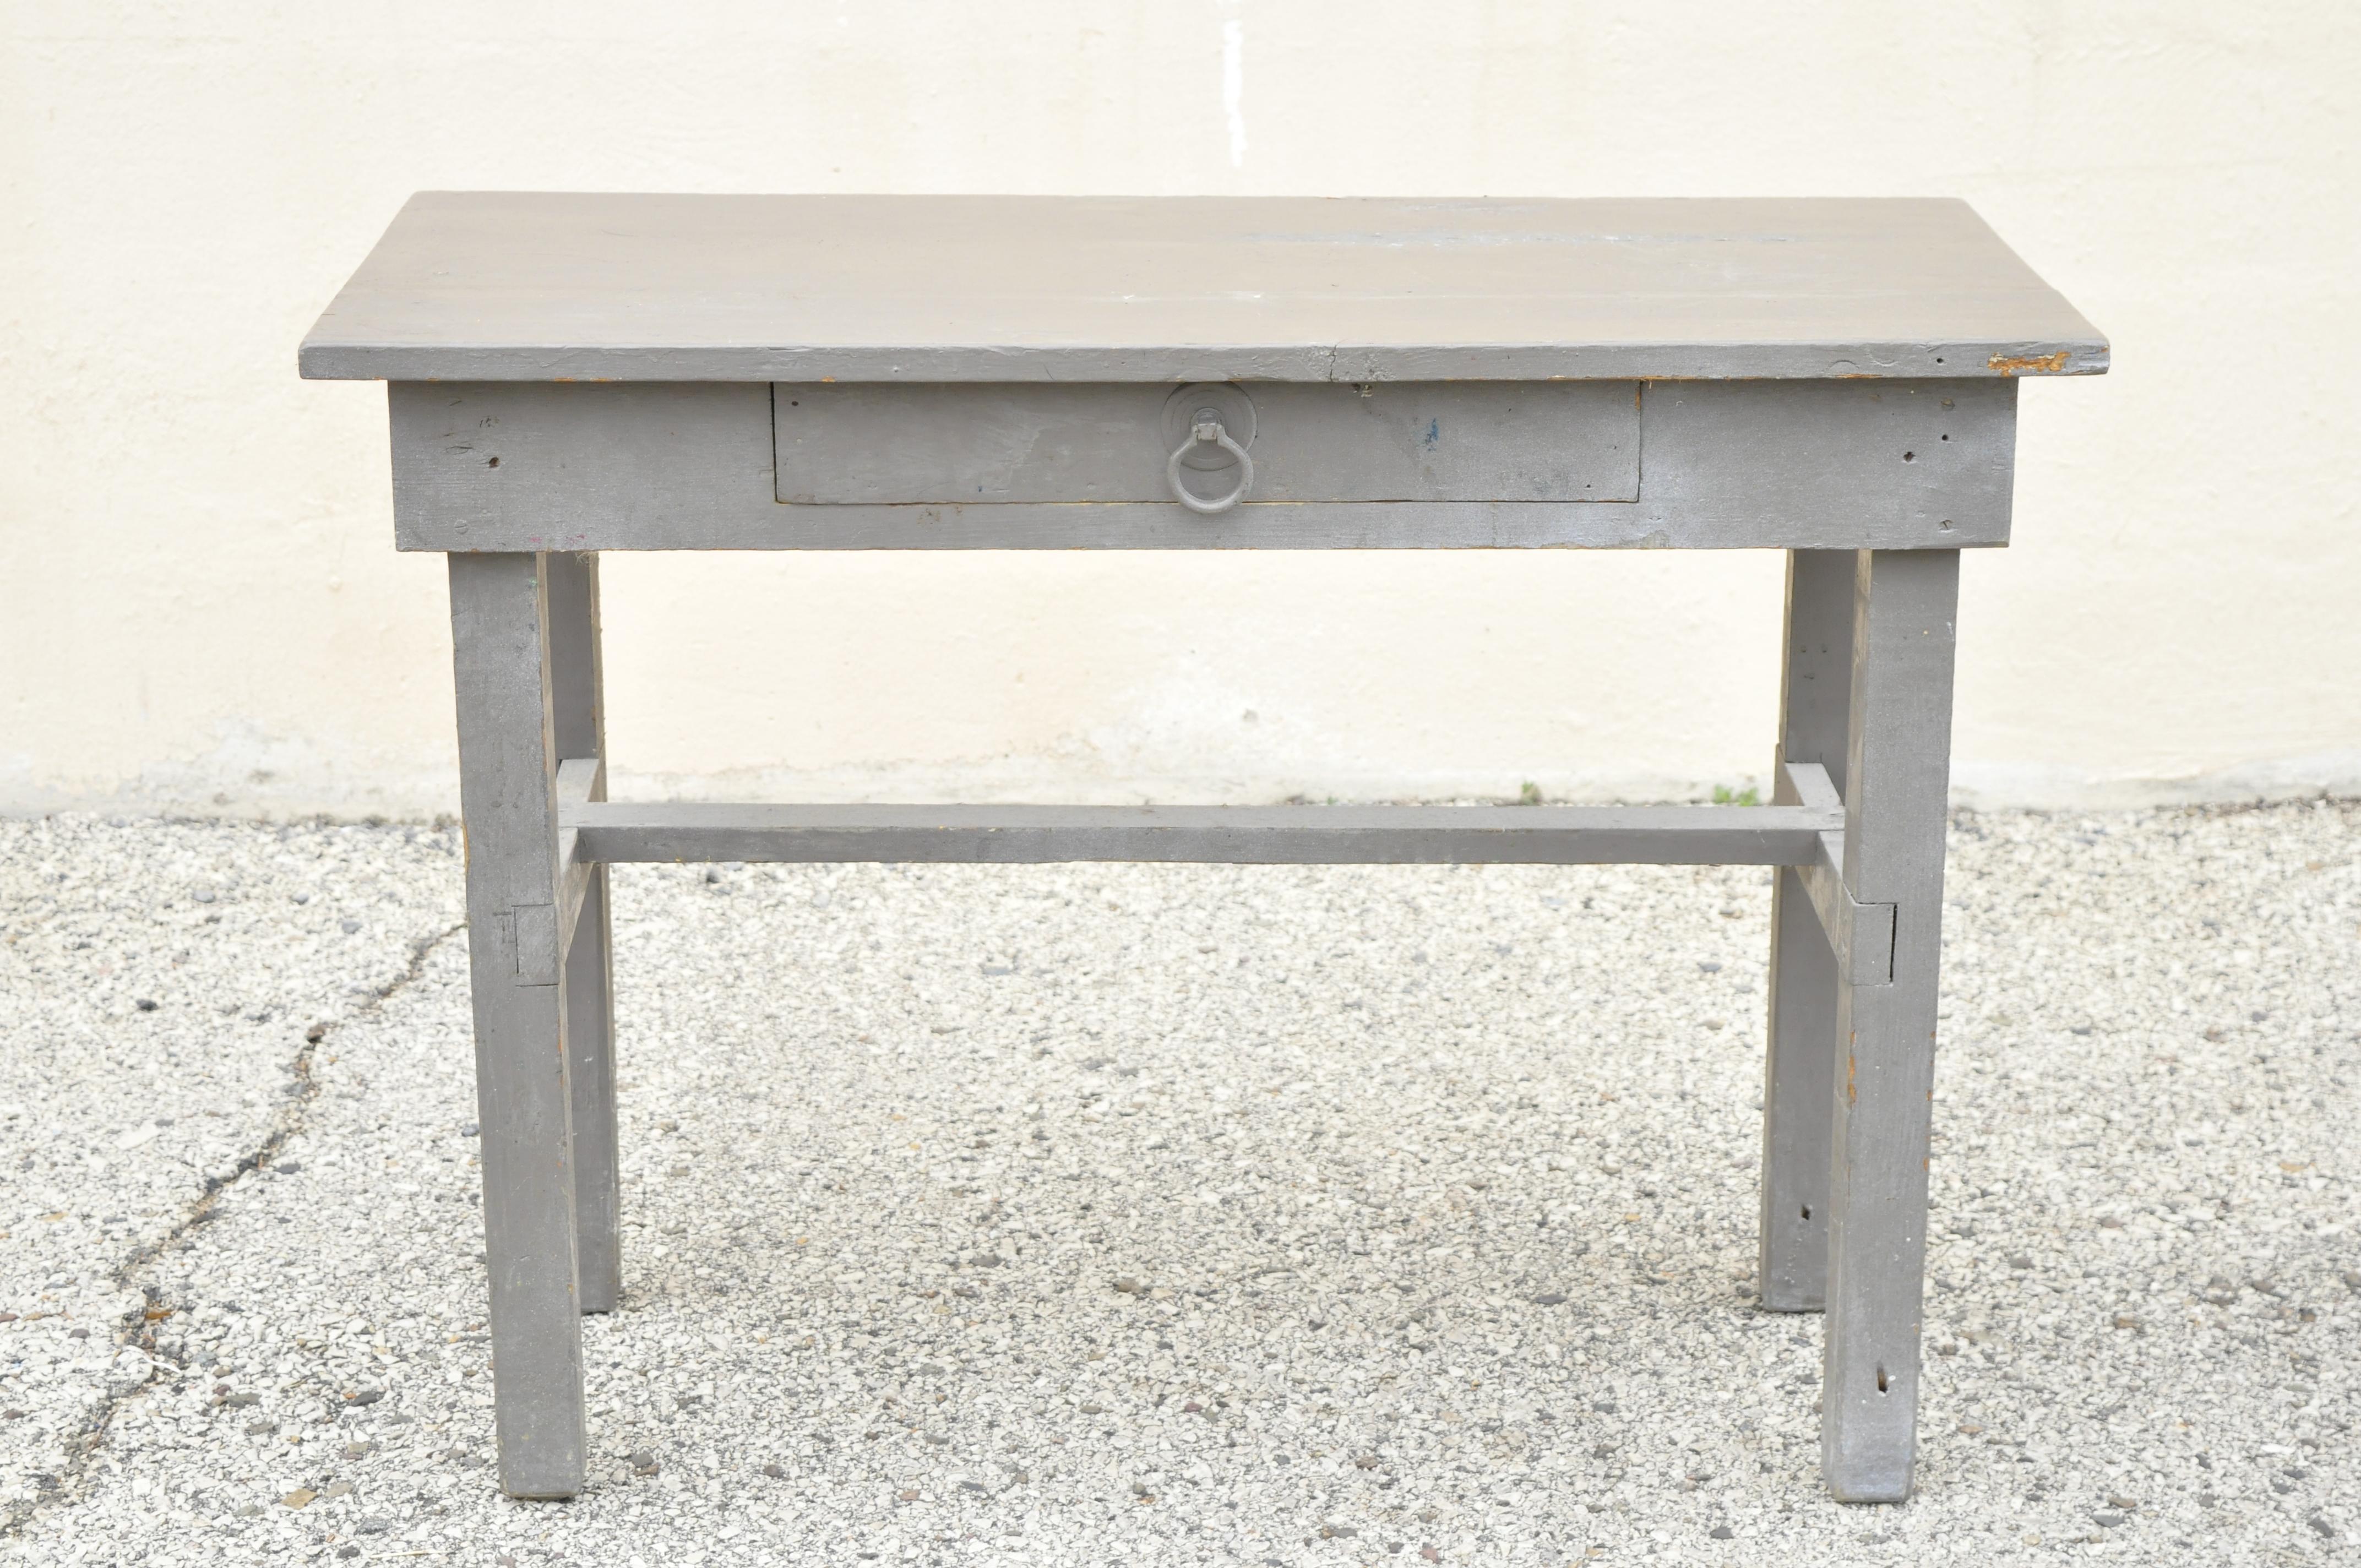 Antique American gray distress painted one drawer small work table desk. Item features solid wood construction, distressed finish, 1 drawers, very nice antique item, great style and form. Circa Early 1900s. Measurements: 26.5